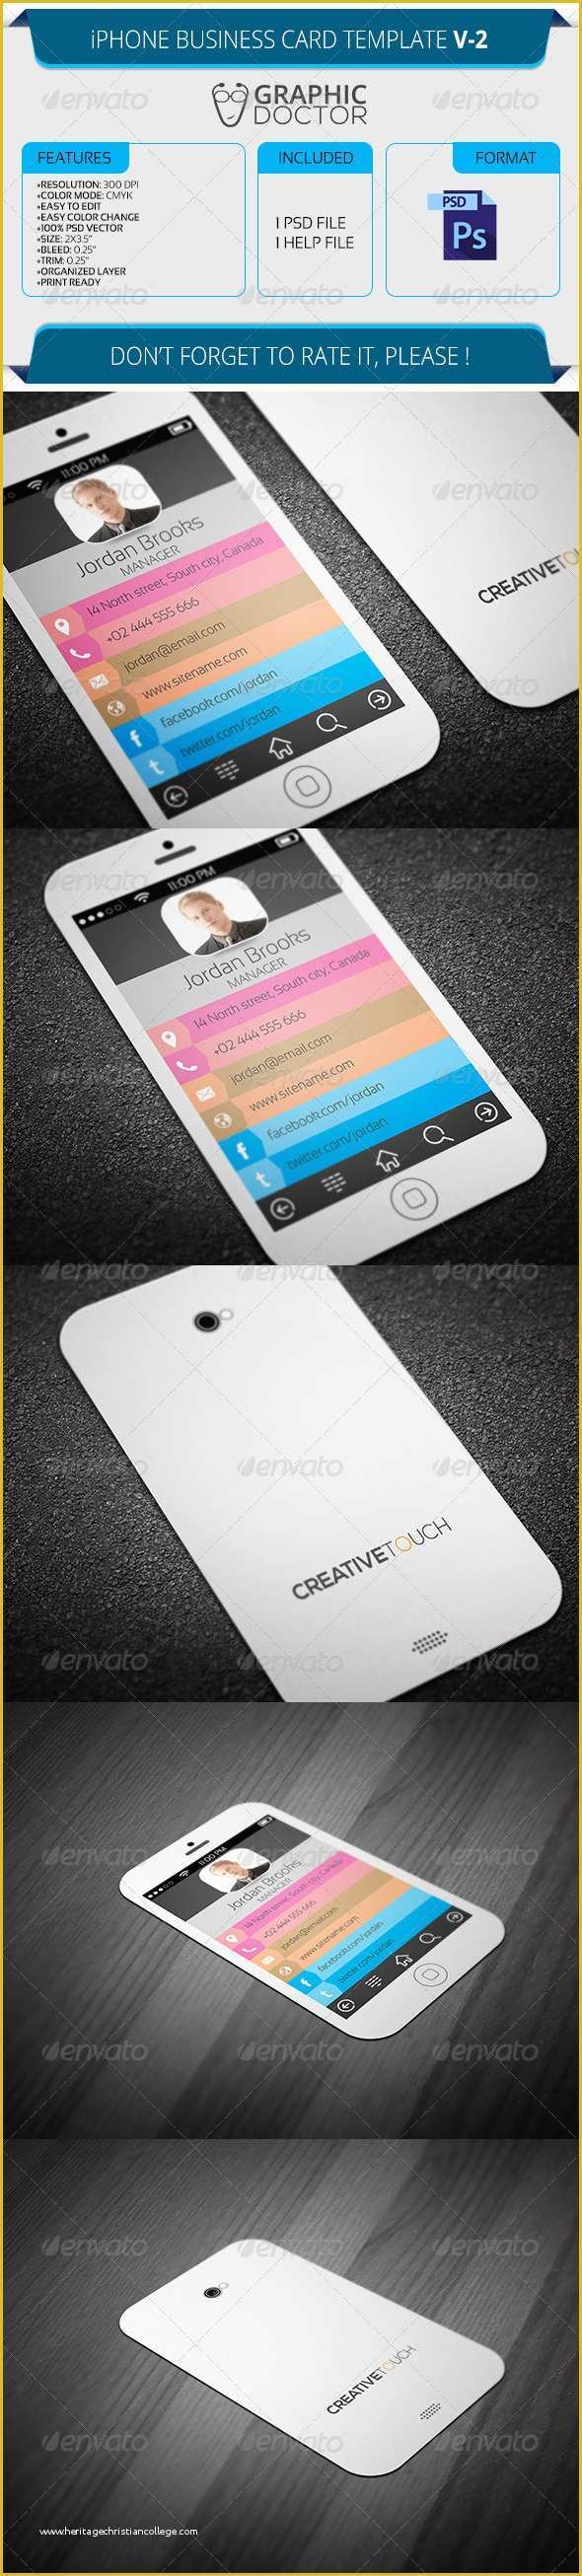 iPhone Business Card Template Free Of iPhone Business Card Template V 2 by Graphicdoctor